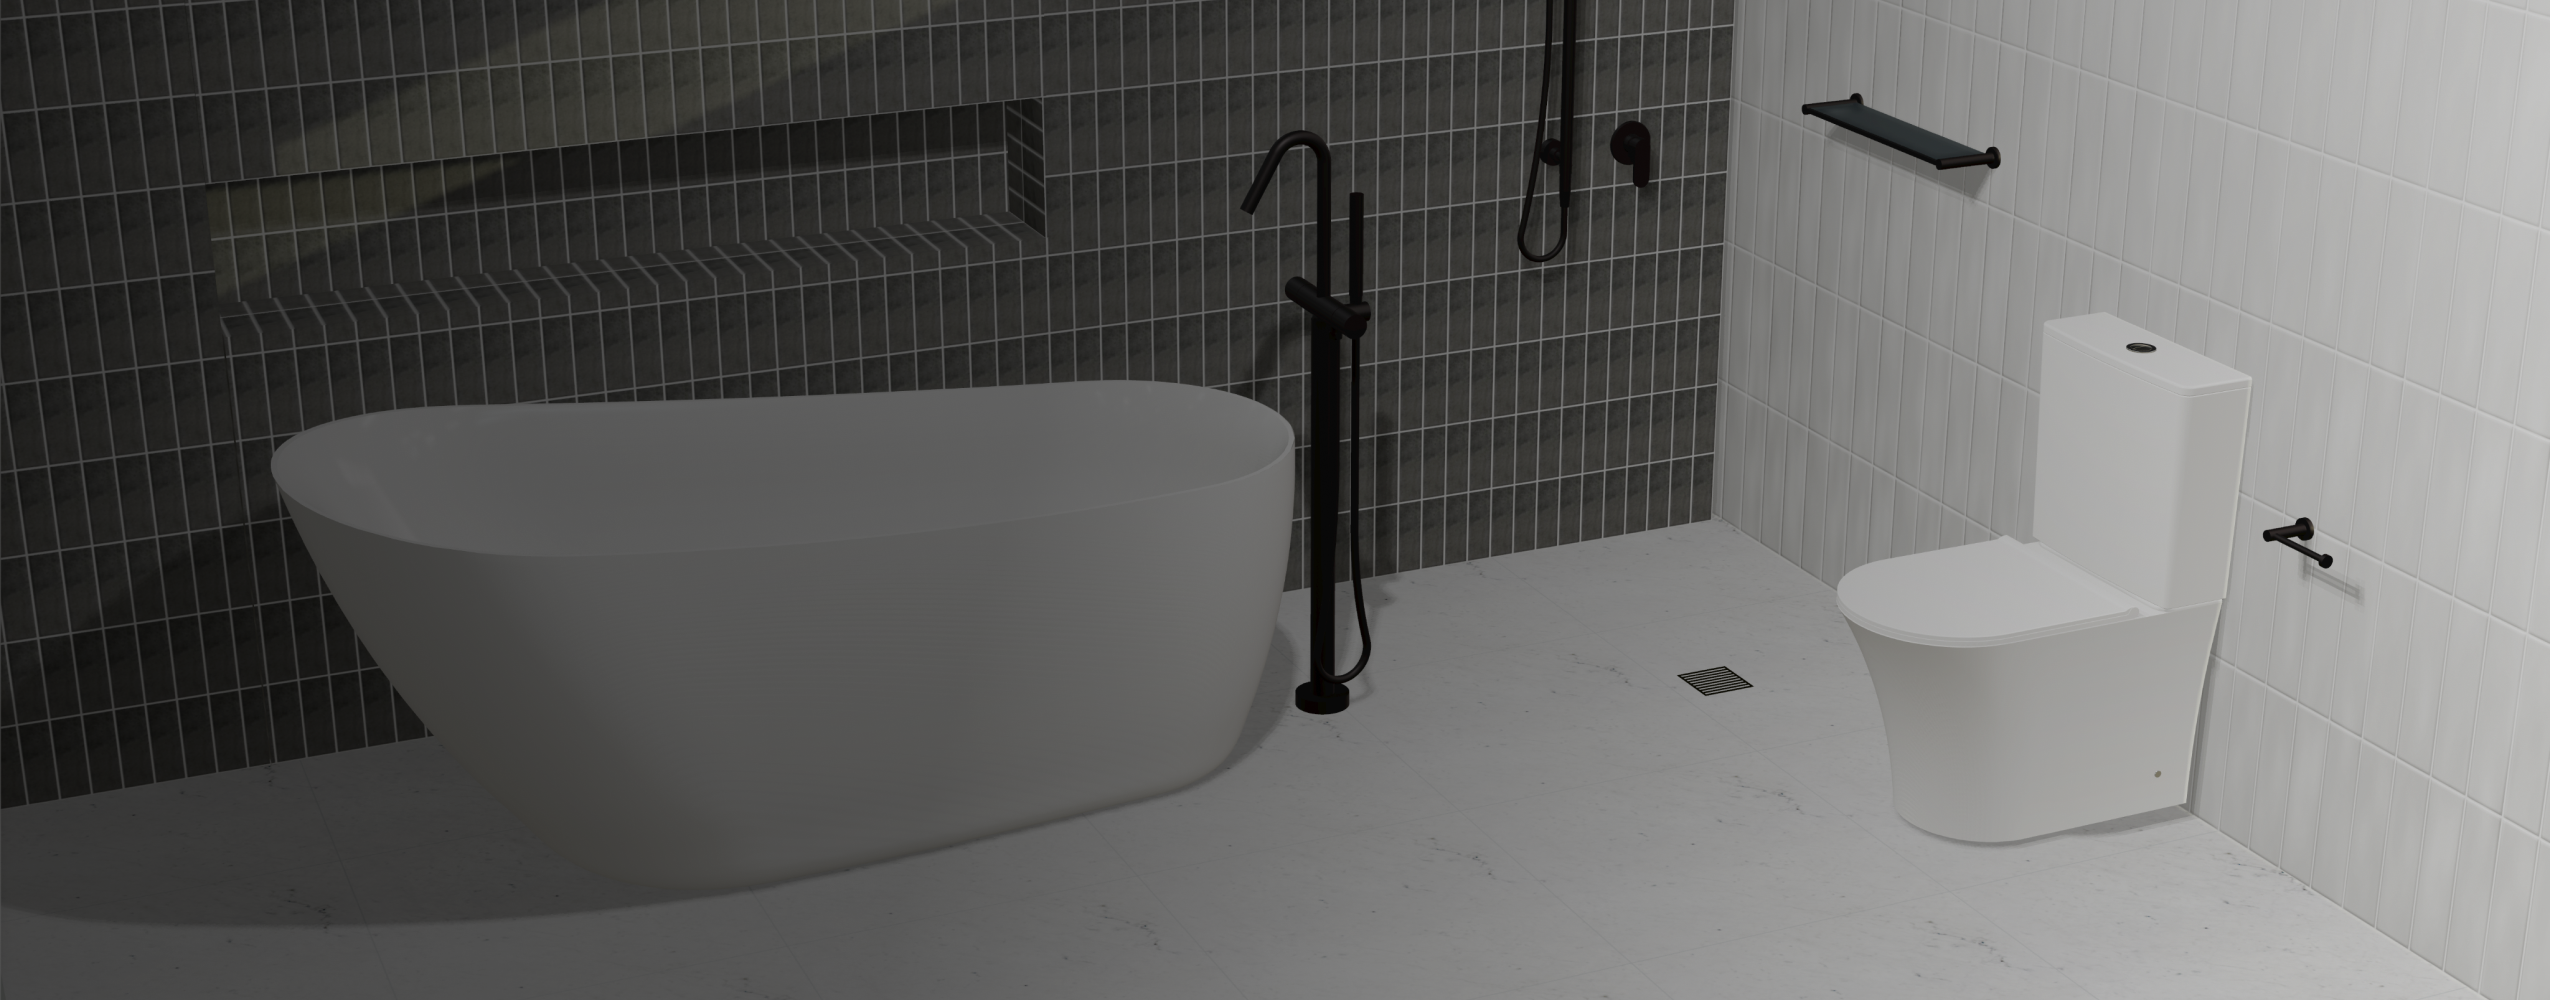 Virtual 3D model of a modern bathroom including a white bathtub and white toilet suite against black and white tiled walls.